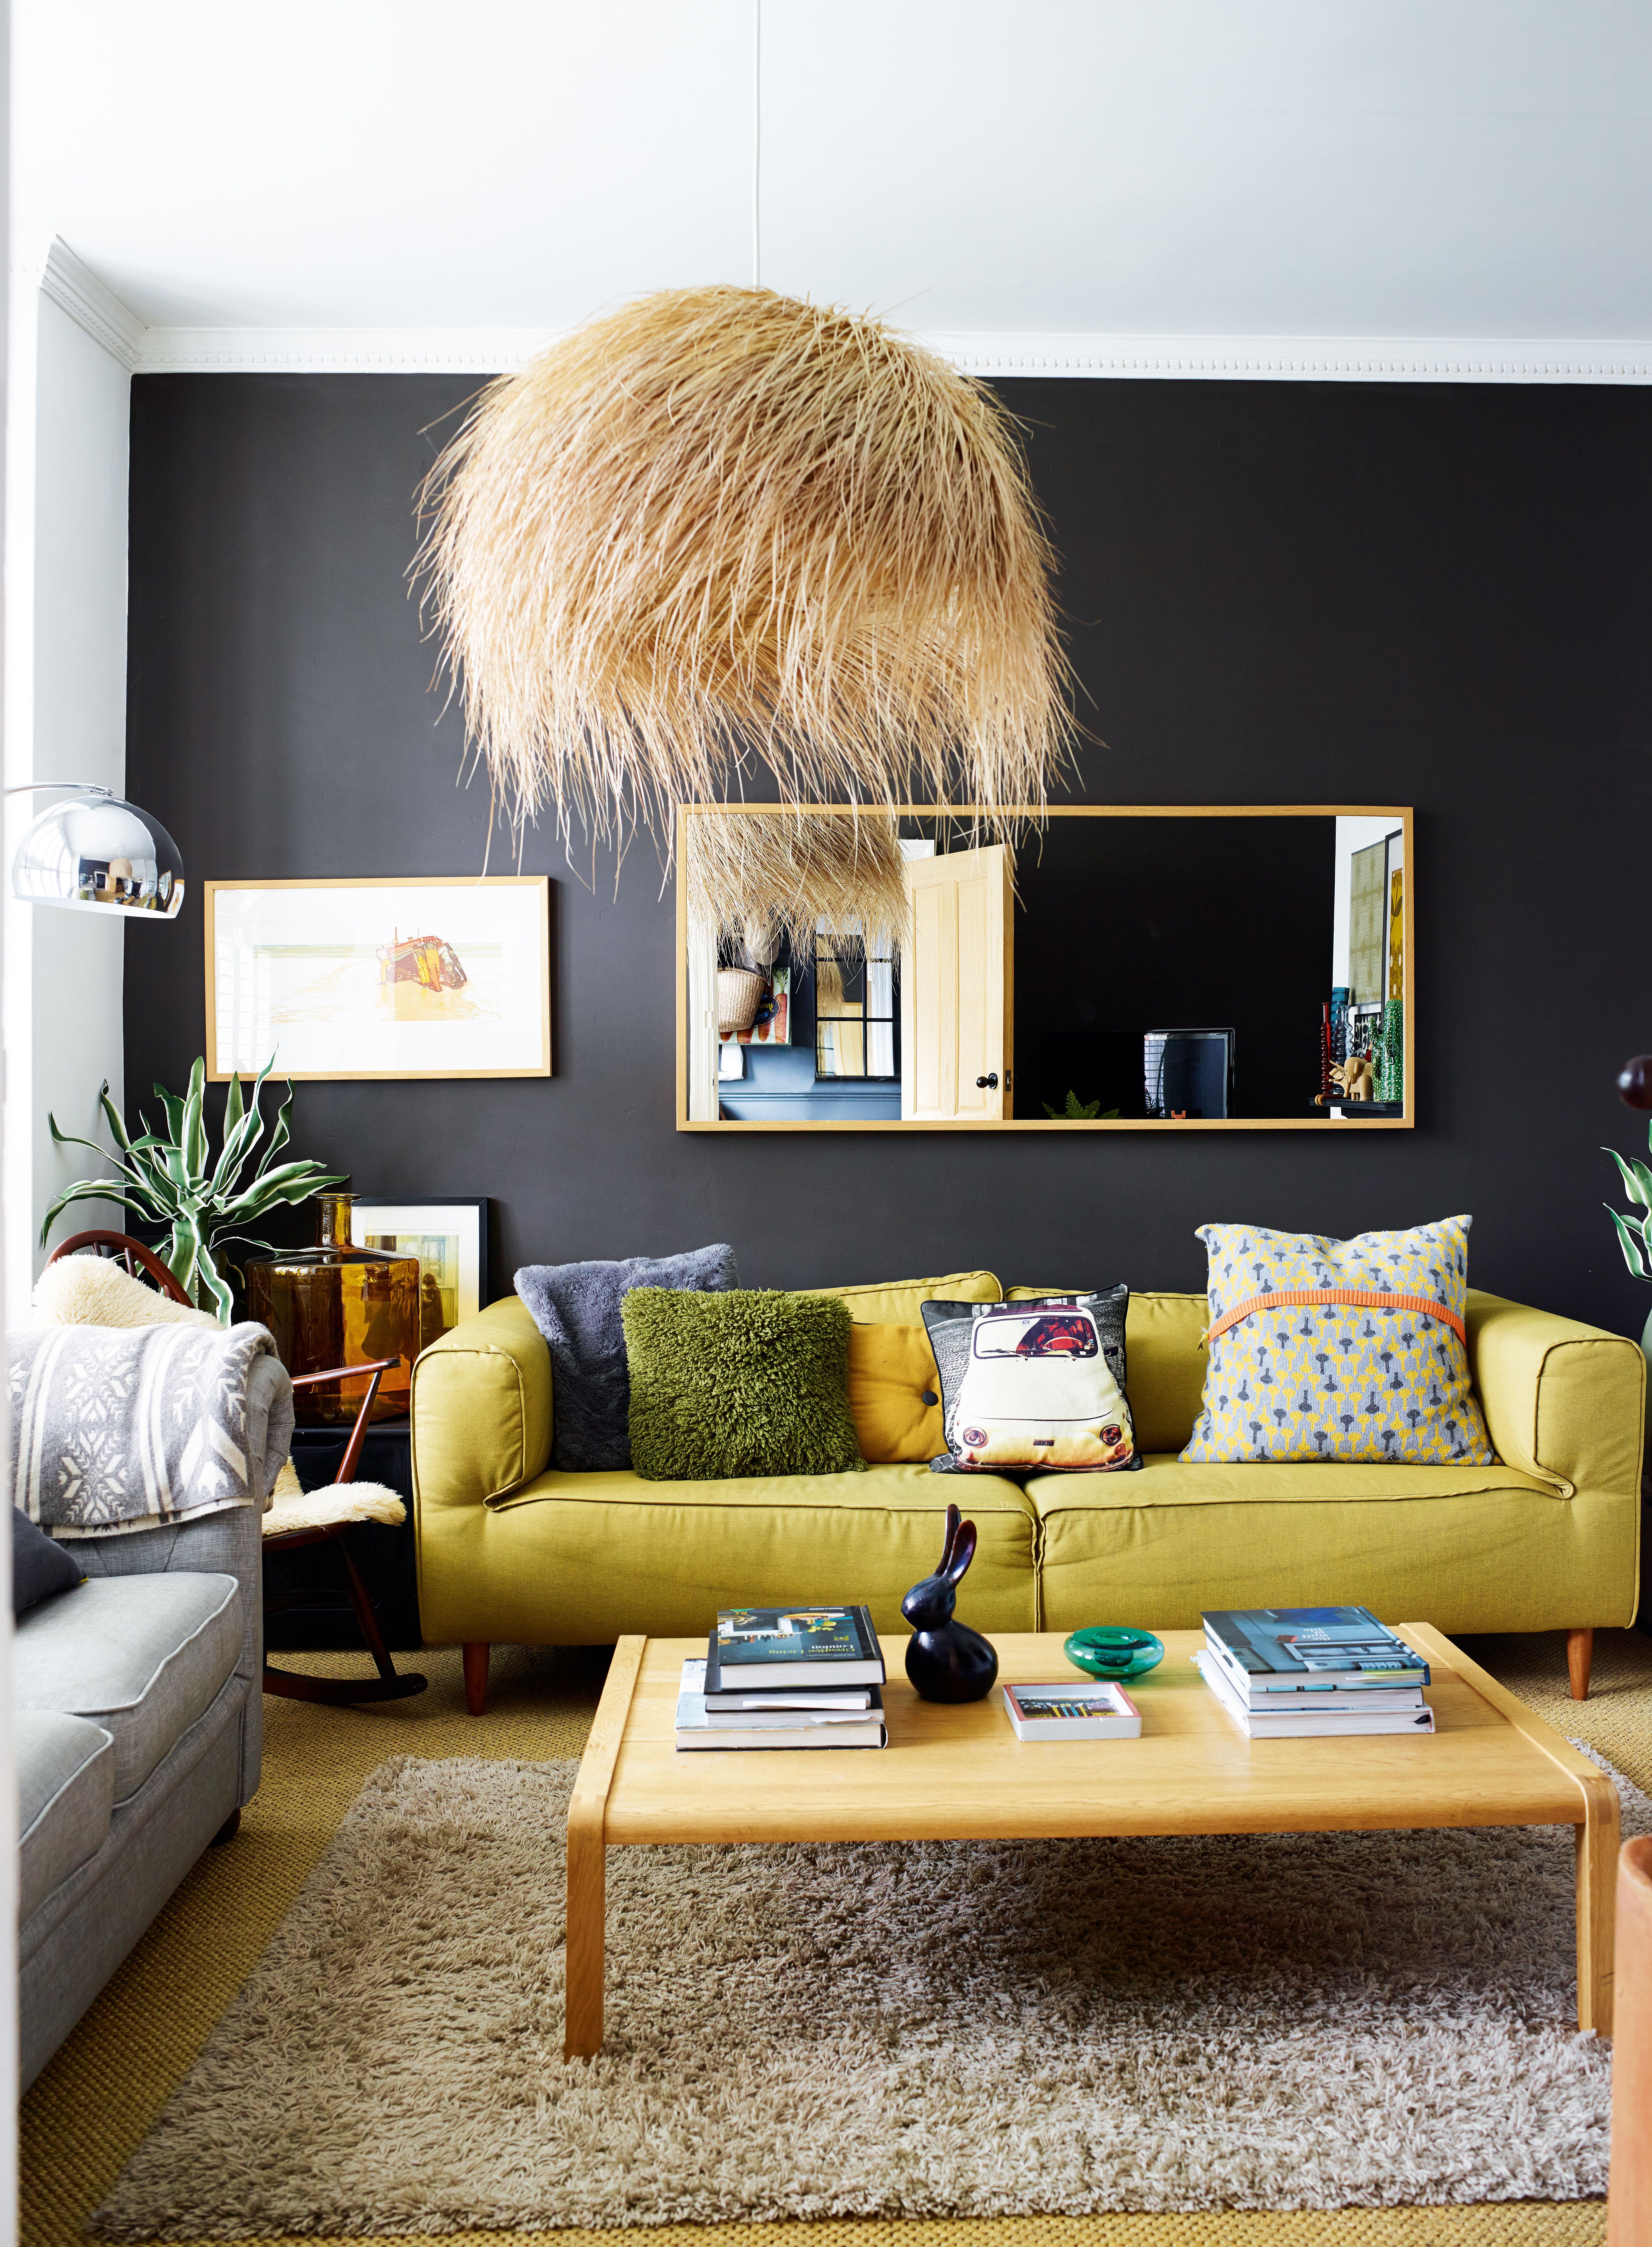 A dark modern grey living room with yellow sofa, seagrass ceiling pendant light and brass-framed rectangular mirror